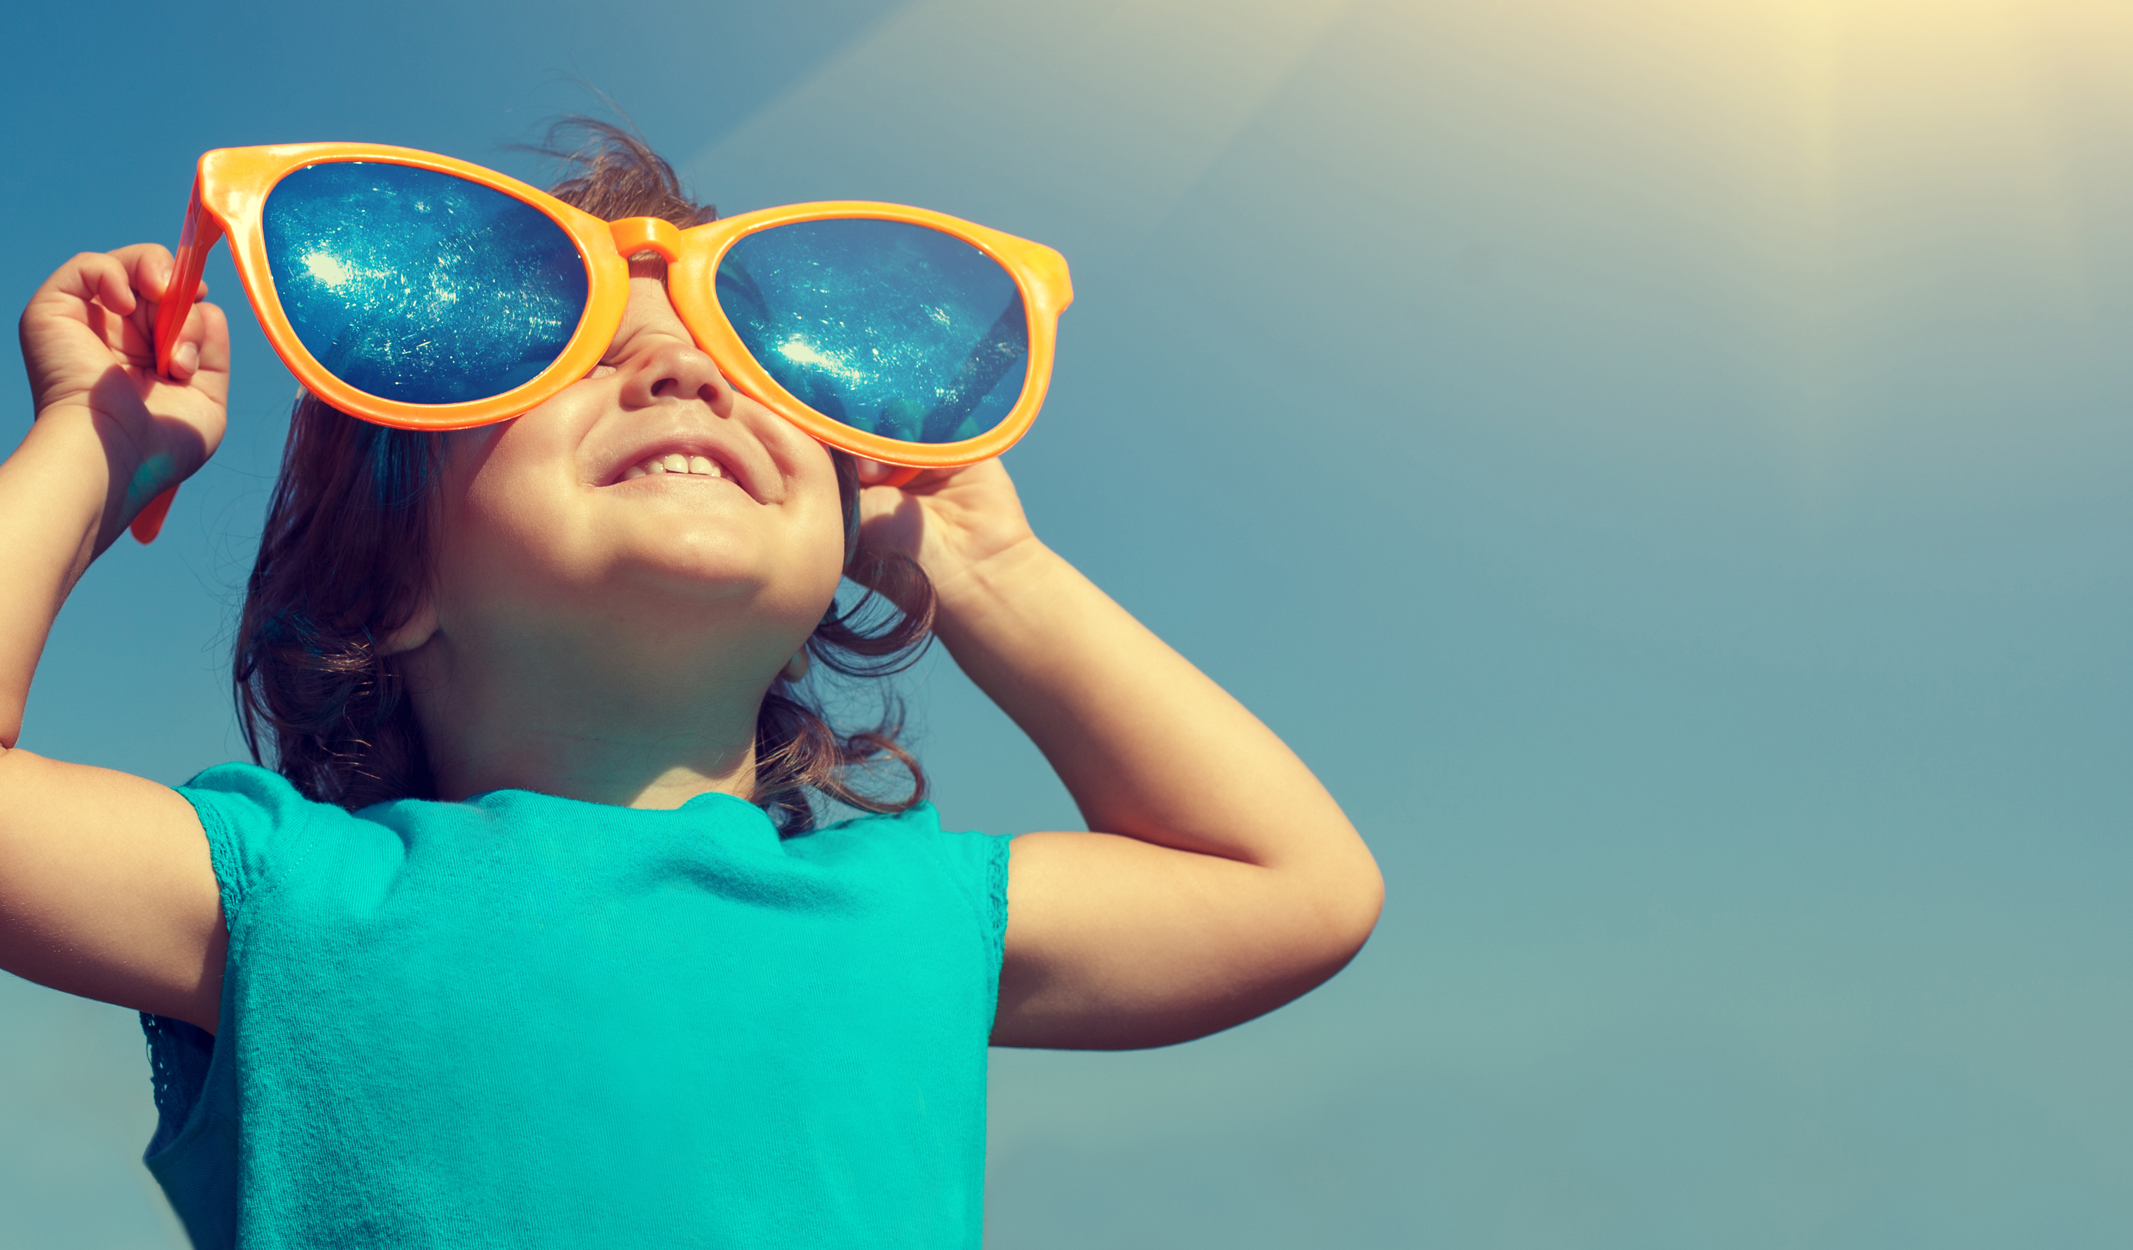 child looking through sunglasses, blue sky with sun shining in back ground